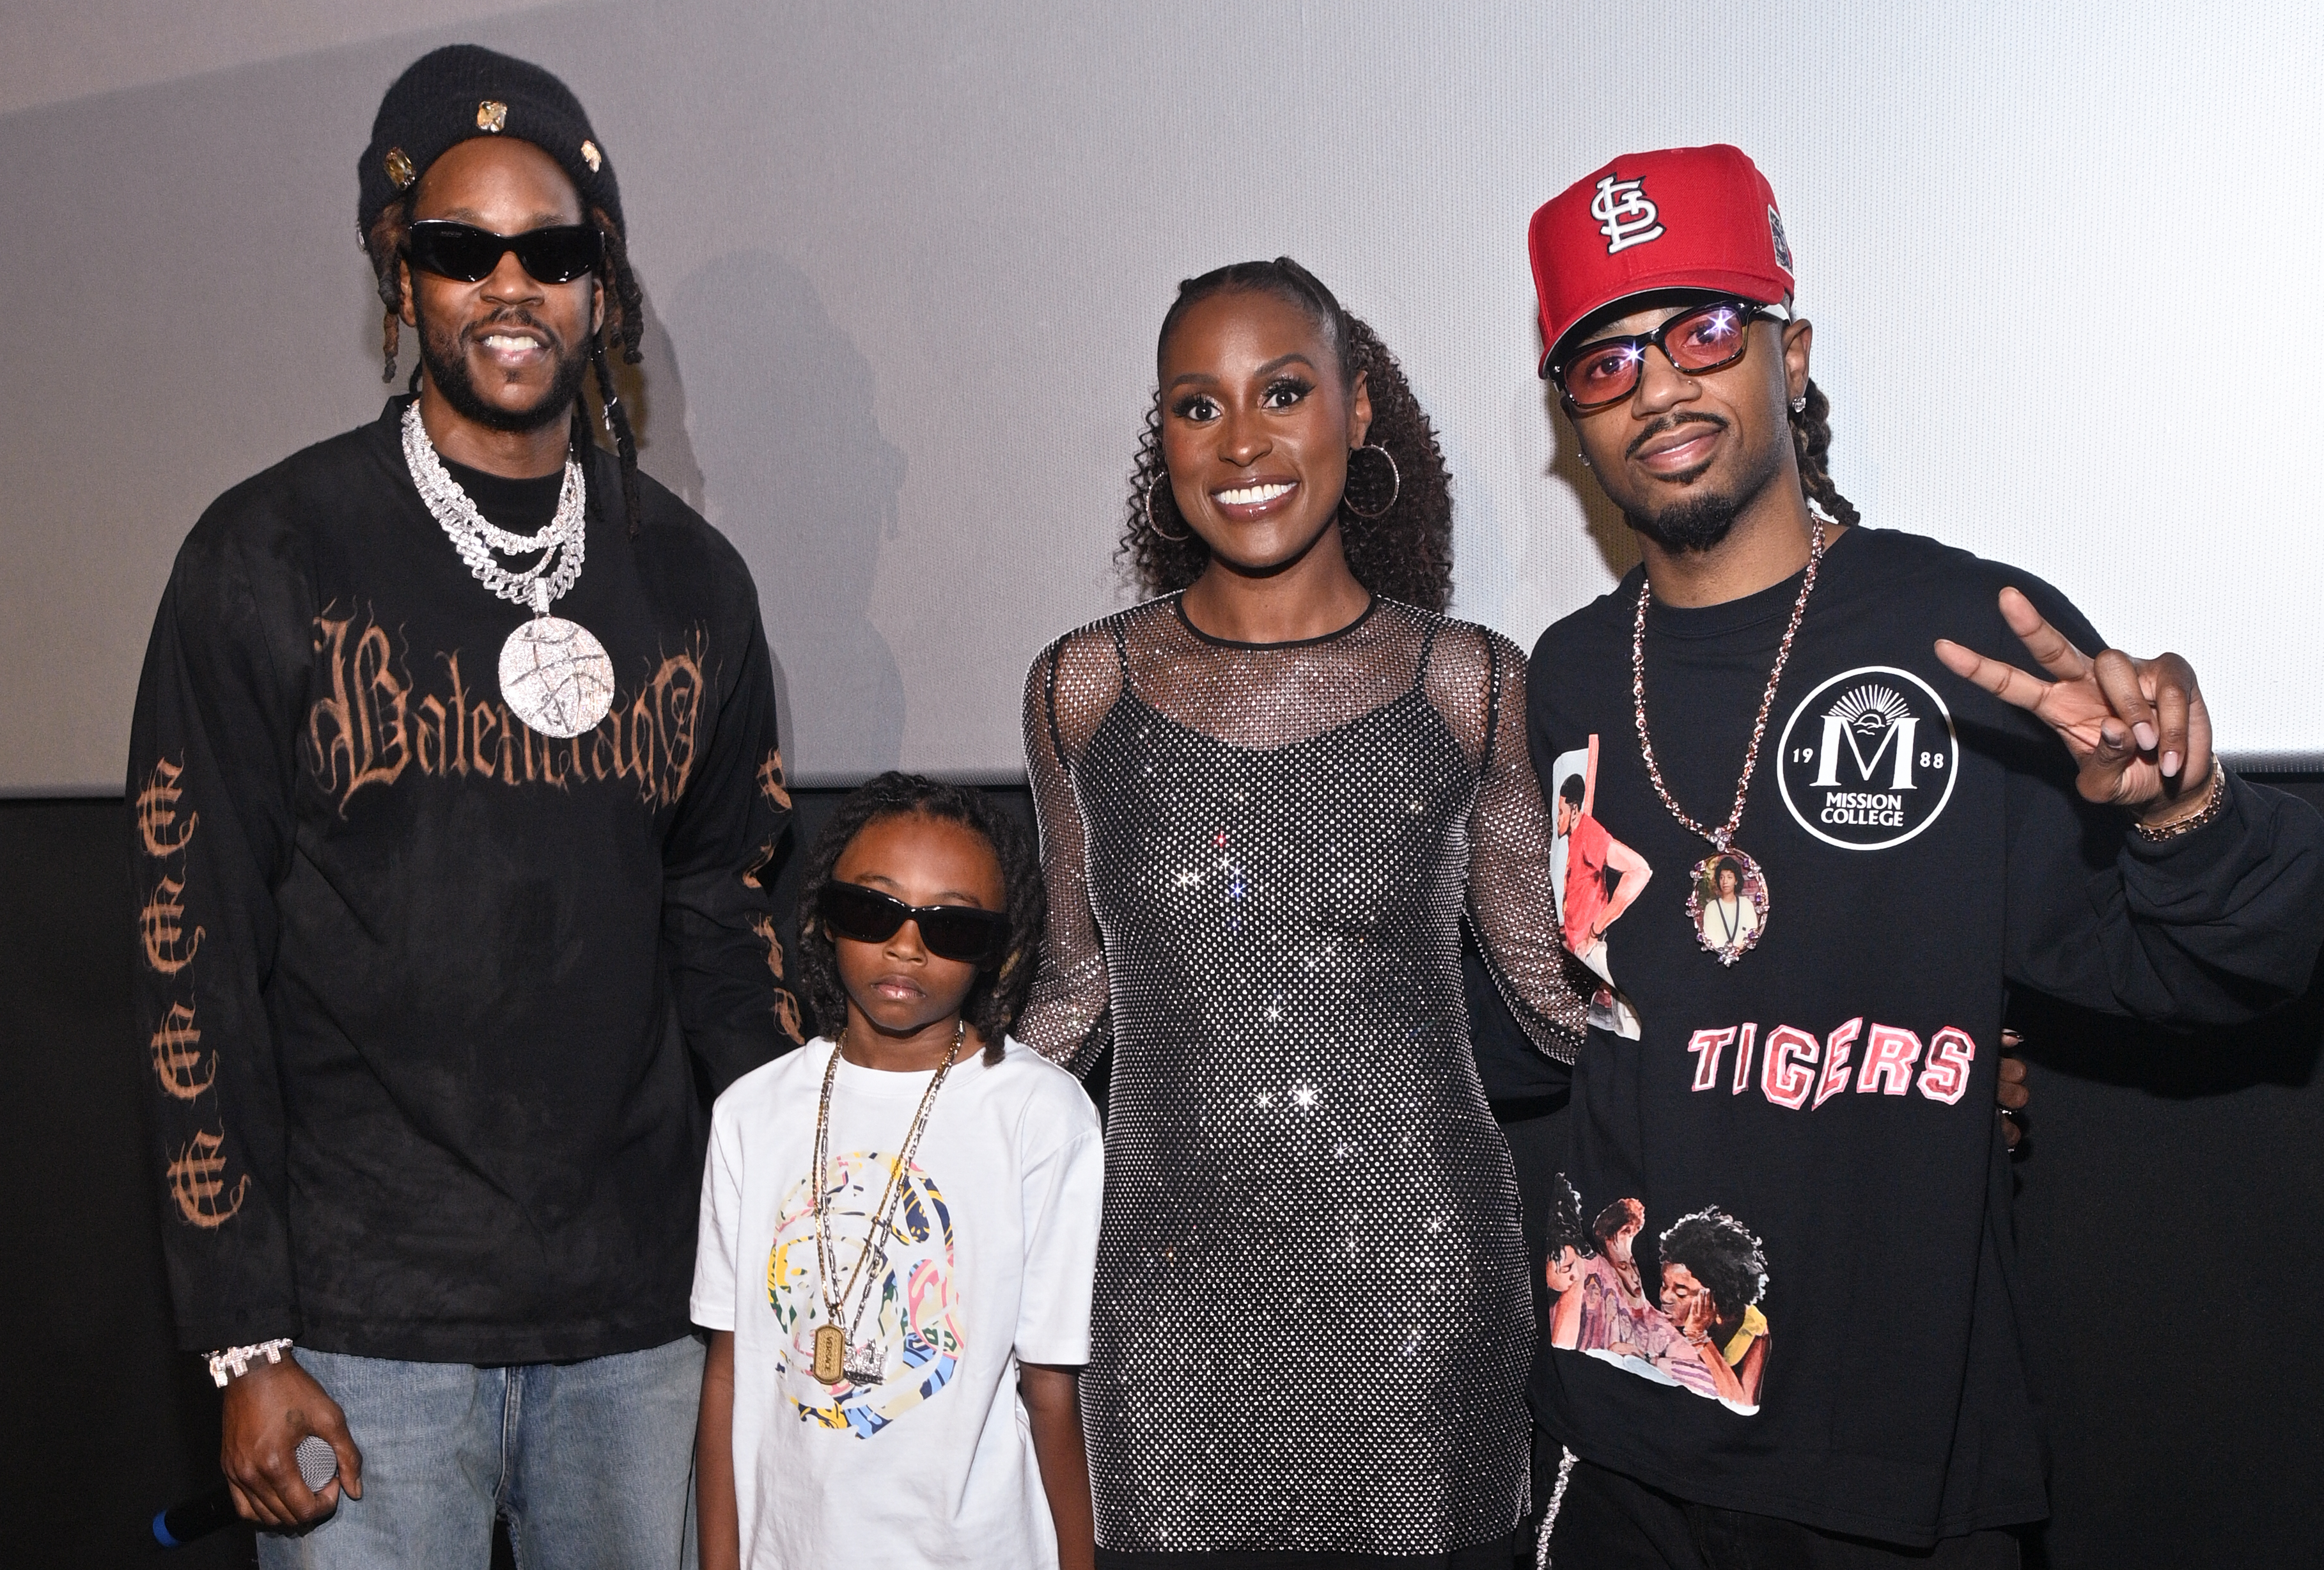 <div>Seen On The Spider-Scene: 2 Chainz, Issa Rae, Metro Boomin, 21 Savage & More Attend â€™Across The Spider-Verseâ€™ Screening Event In Atlanta</div>